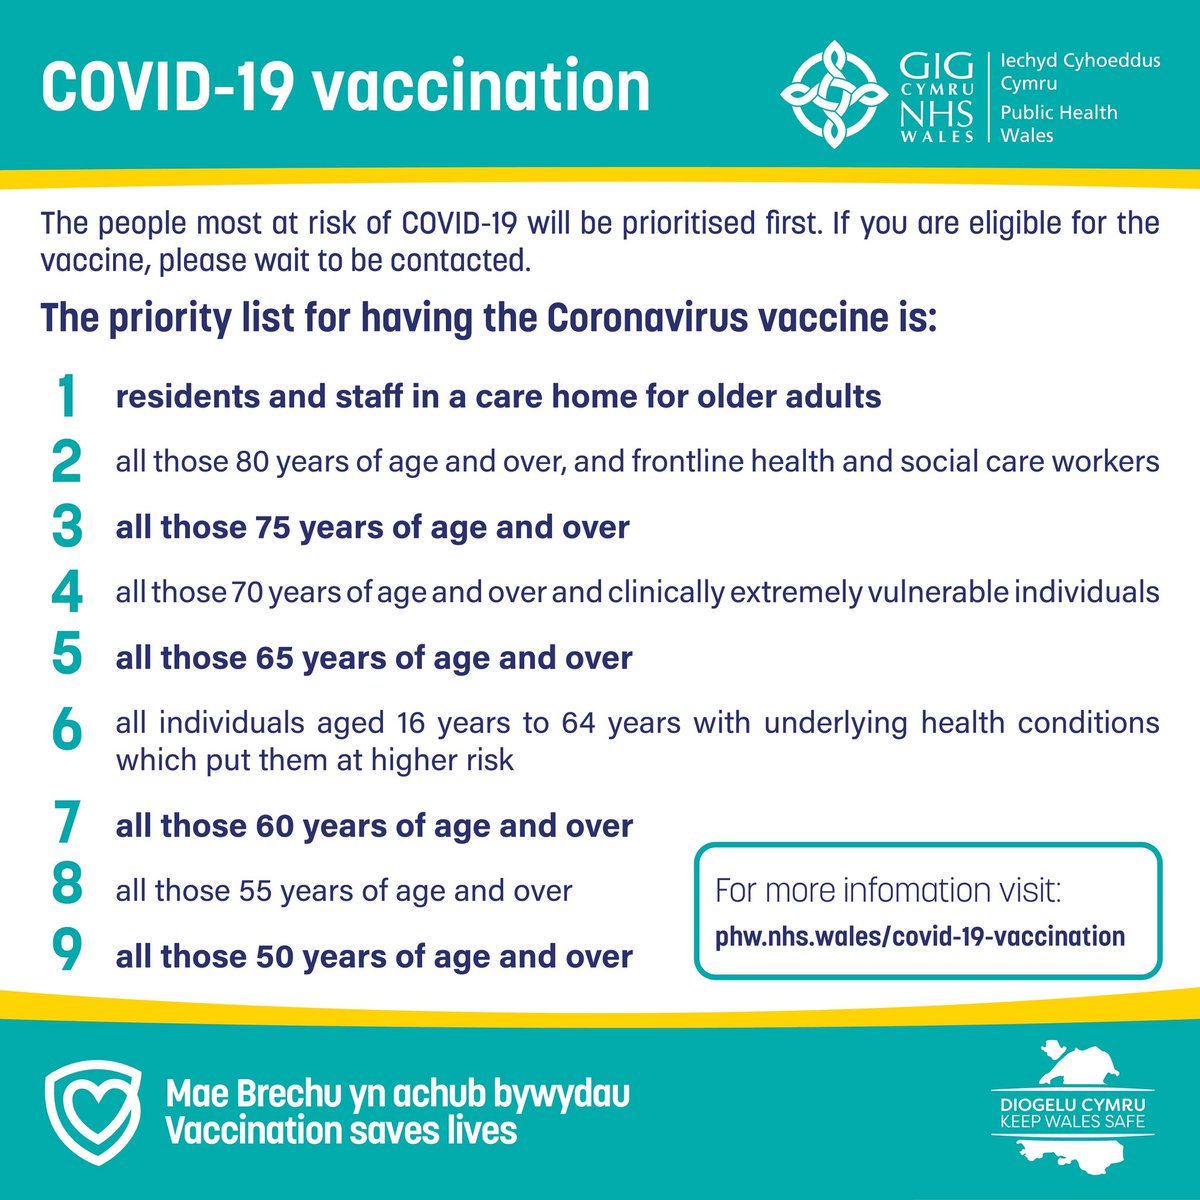 Vaccination is currently taking place for people living in a care home for older adults, people aged 80 and over, and health and care workers.We expect to complete our invitations to people aged 80 and over by the end of January.(3/4)